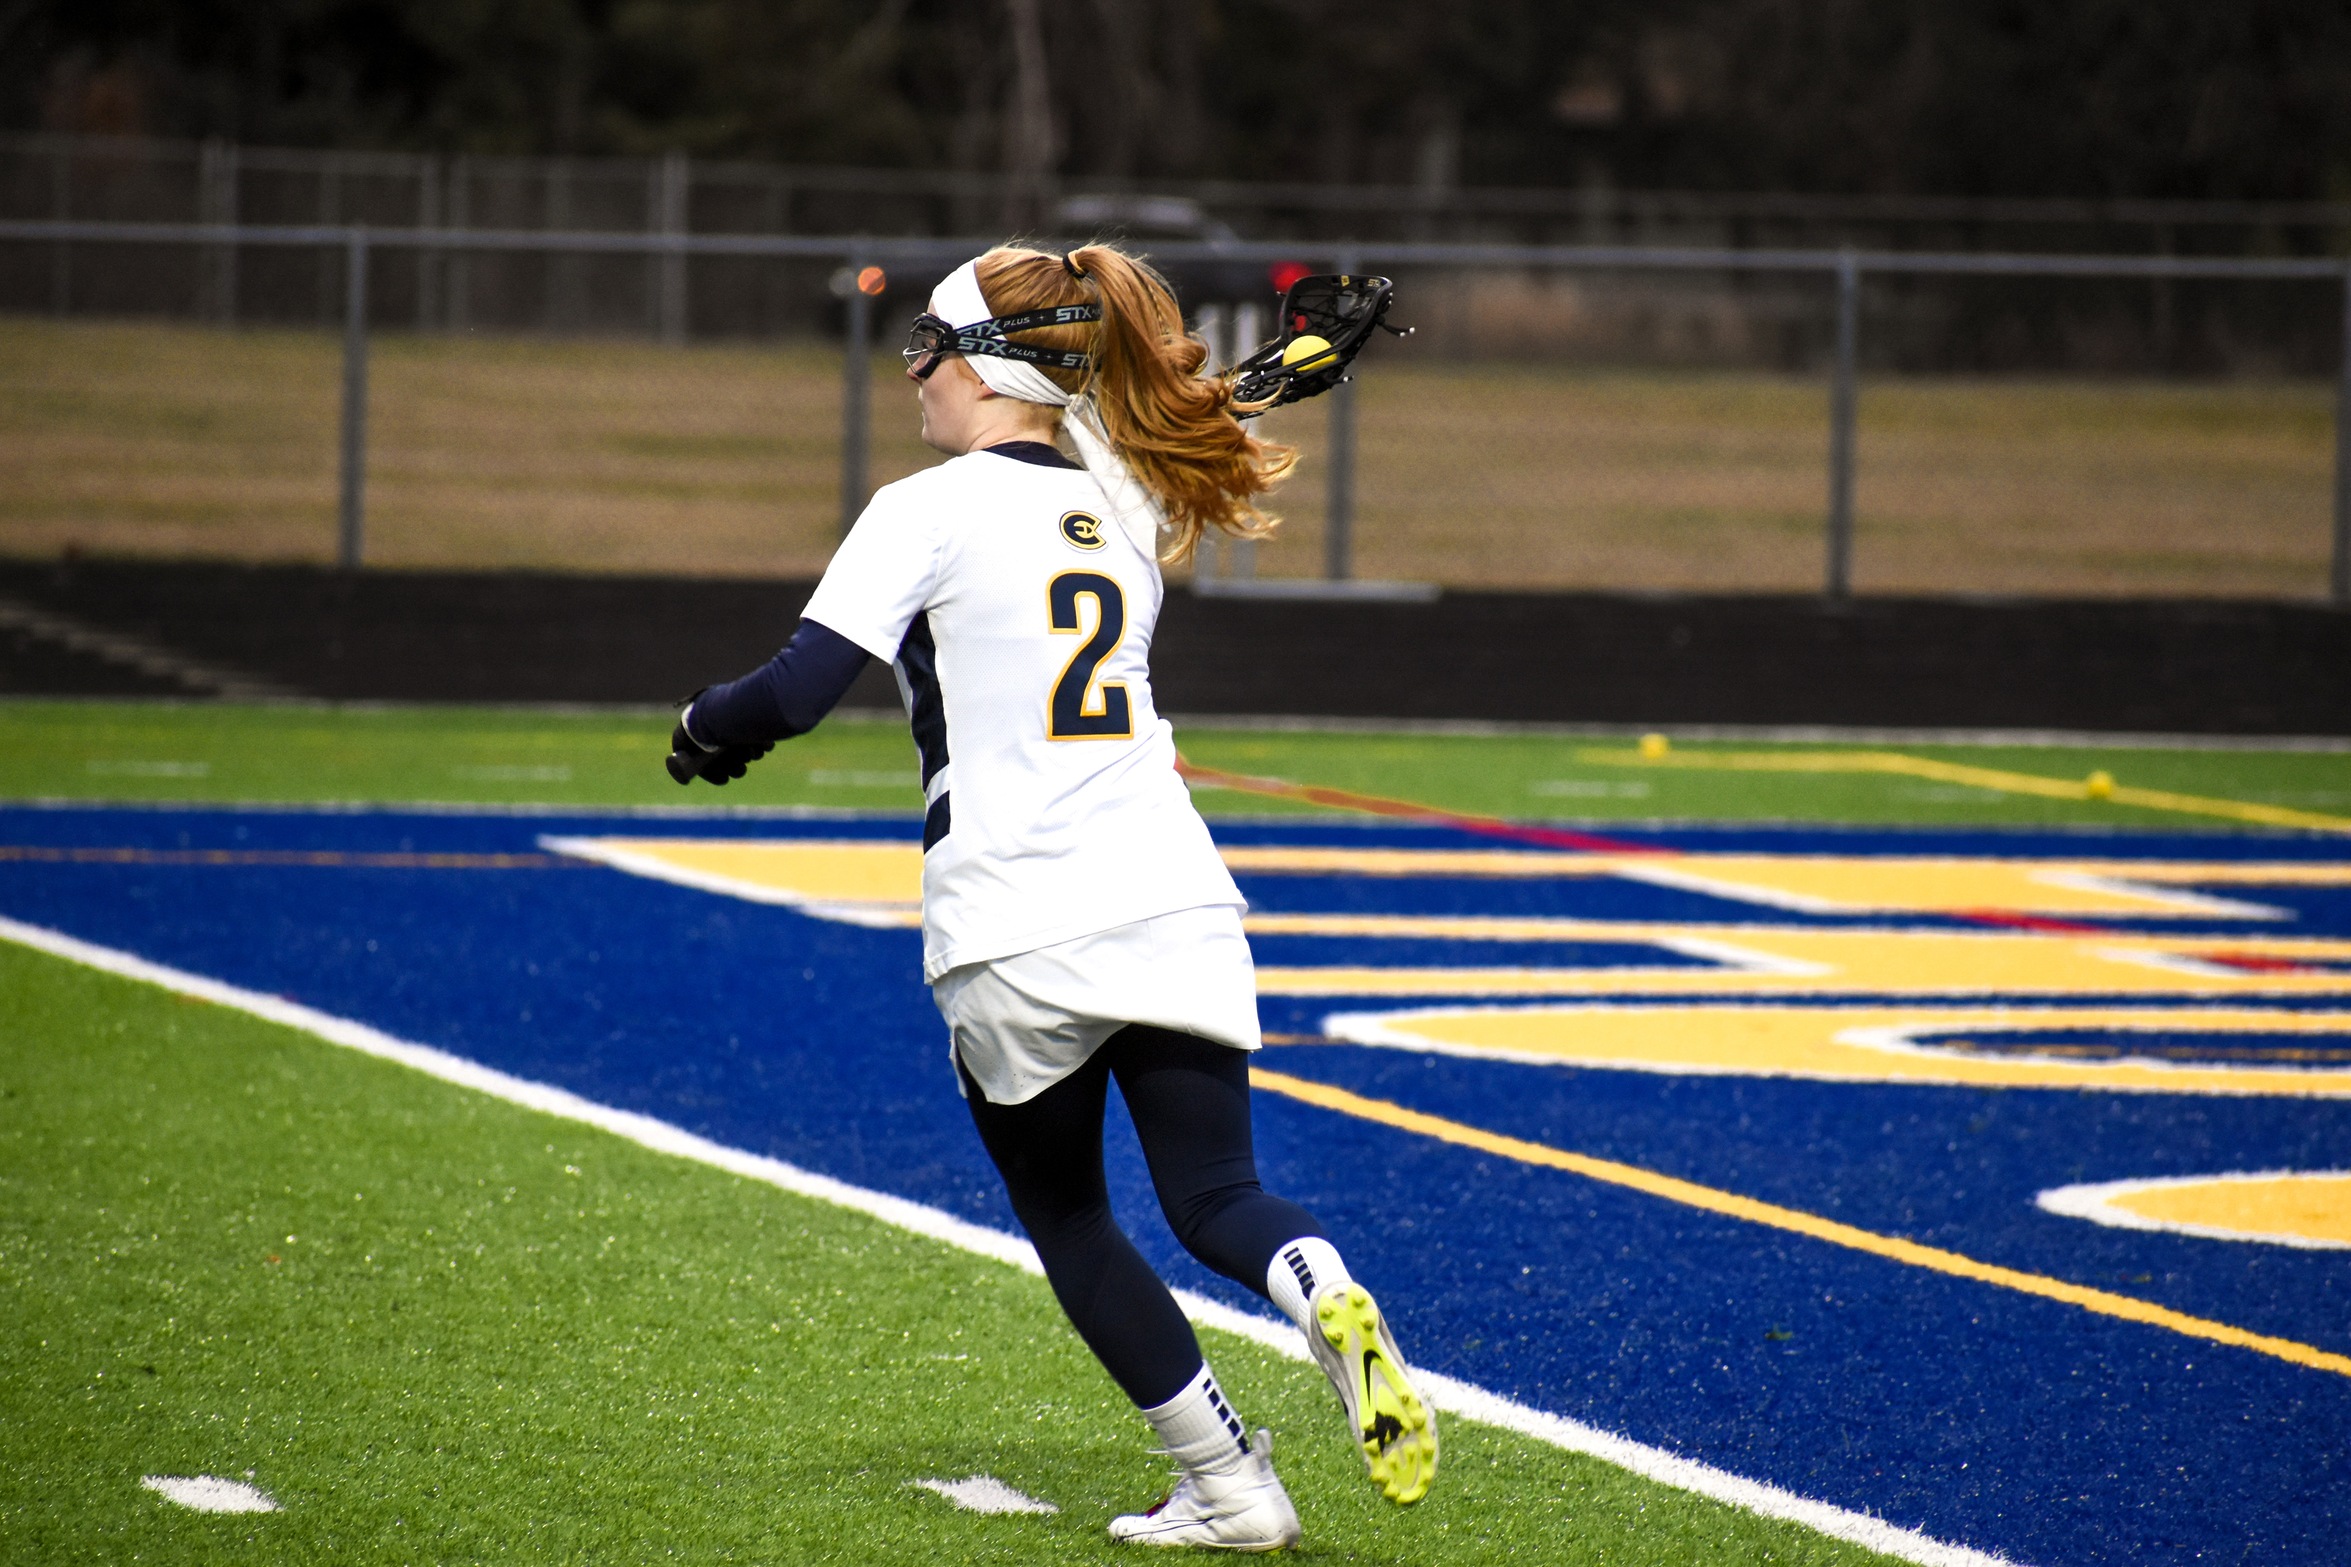 Blugolds Fall to Falcons to End Regular Season